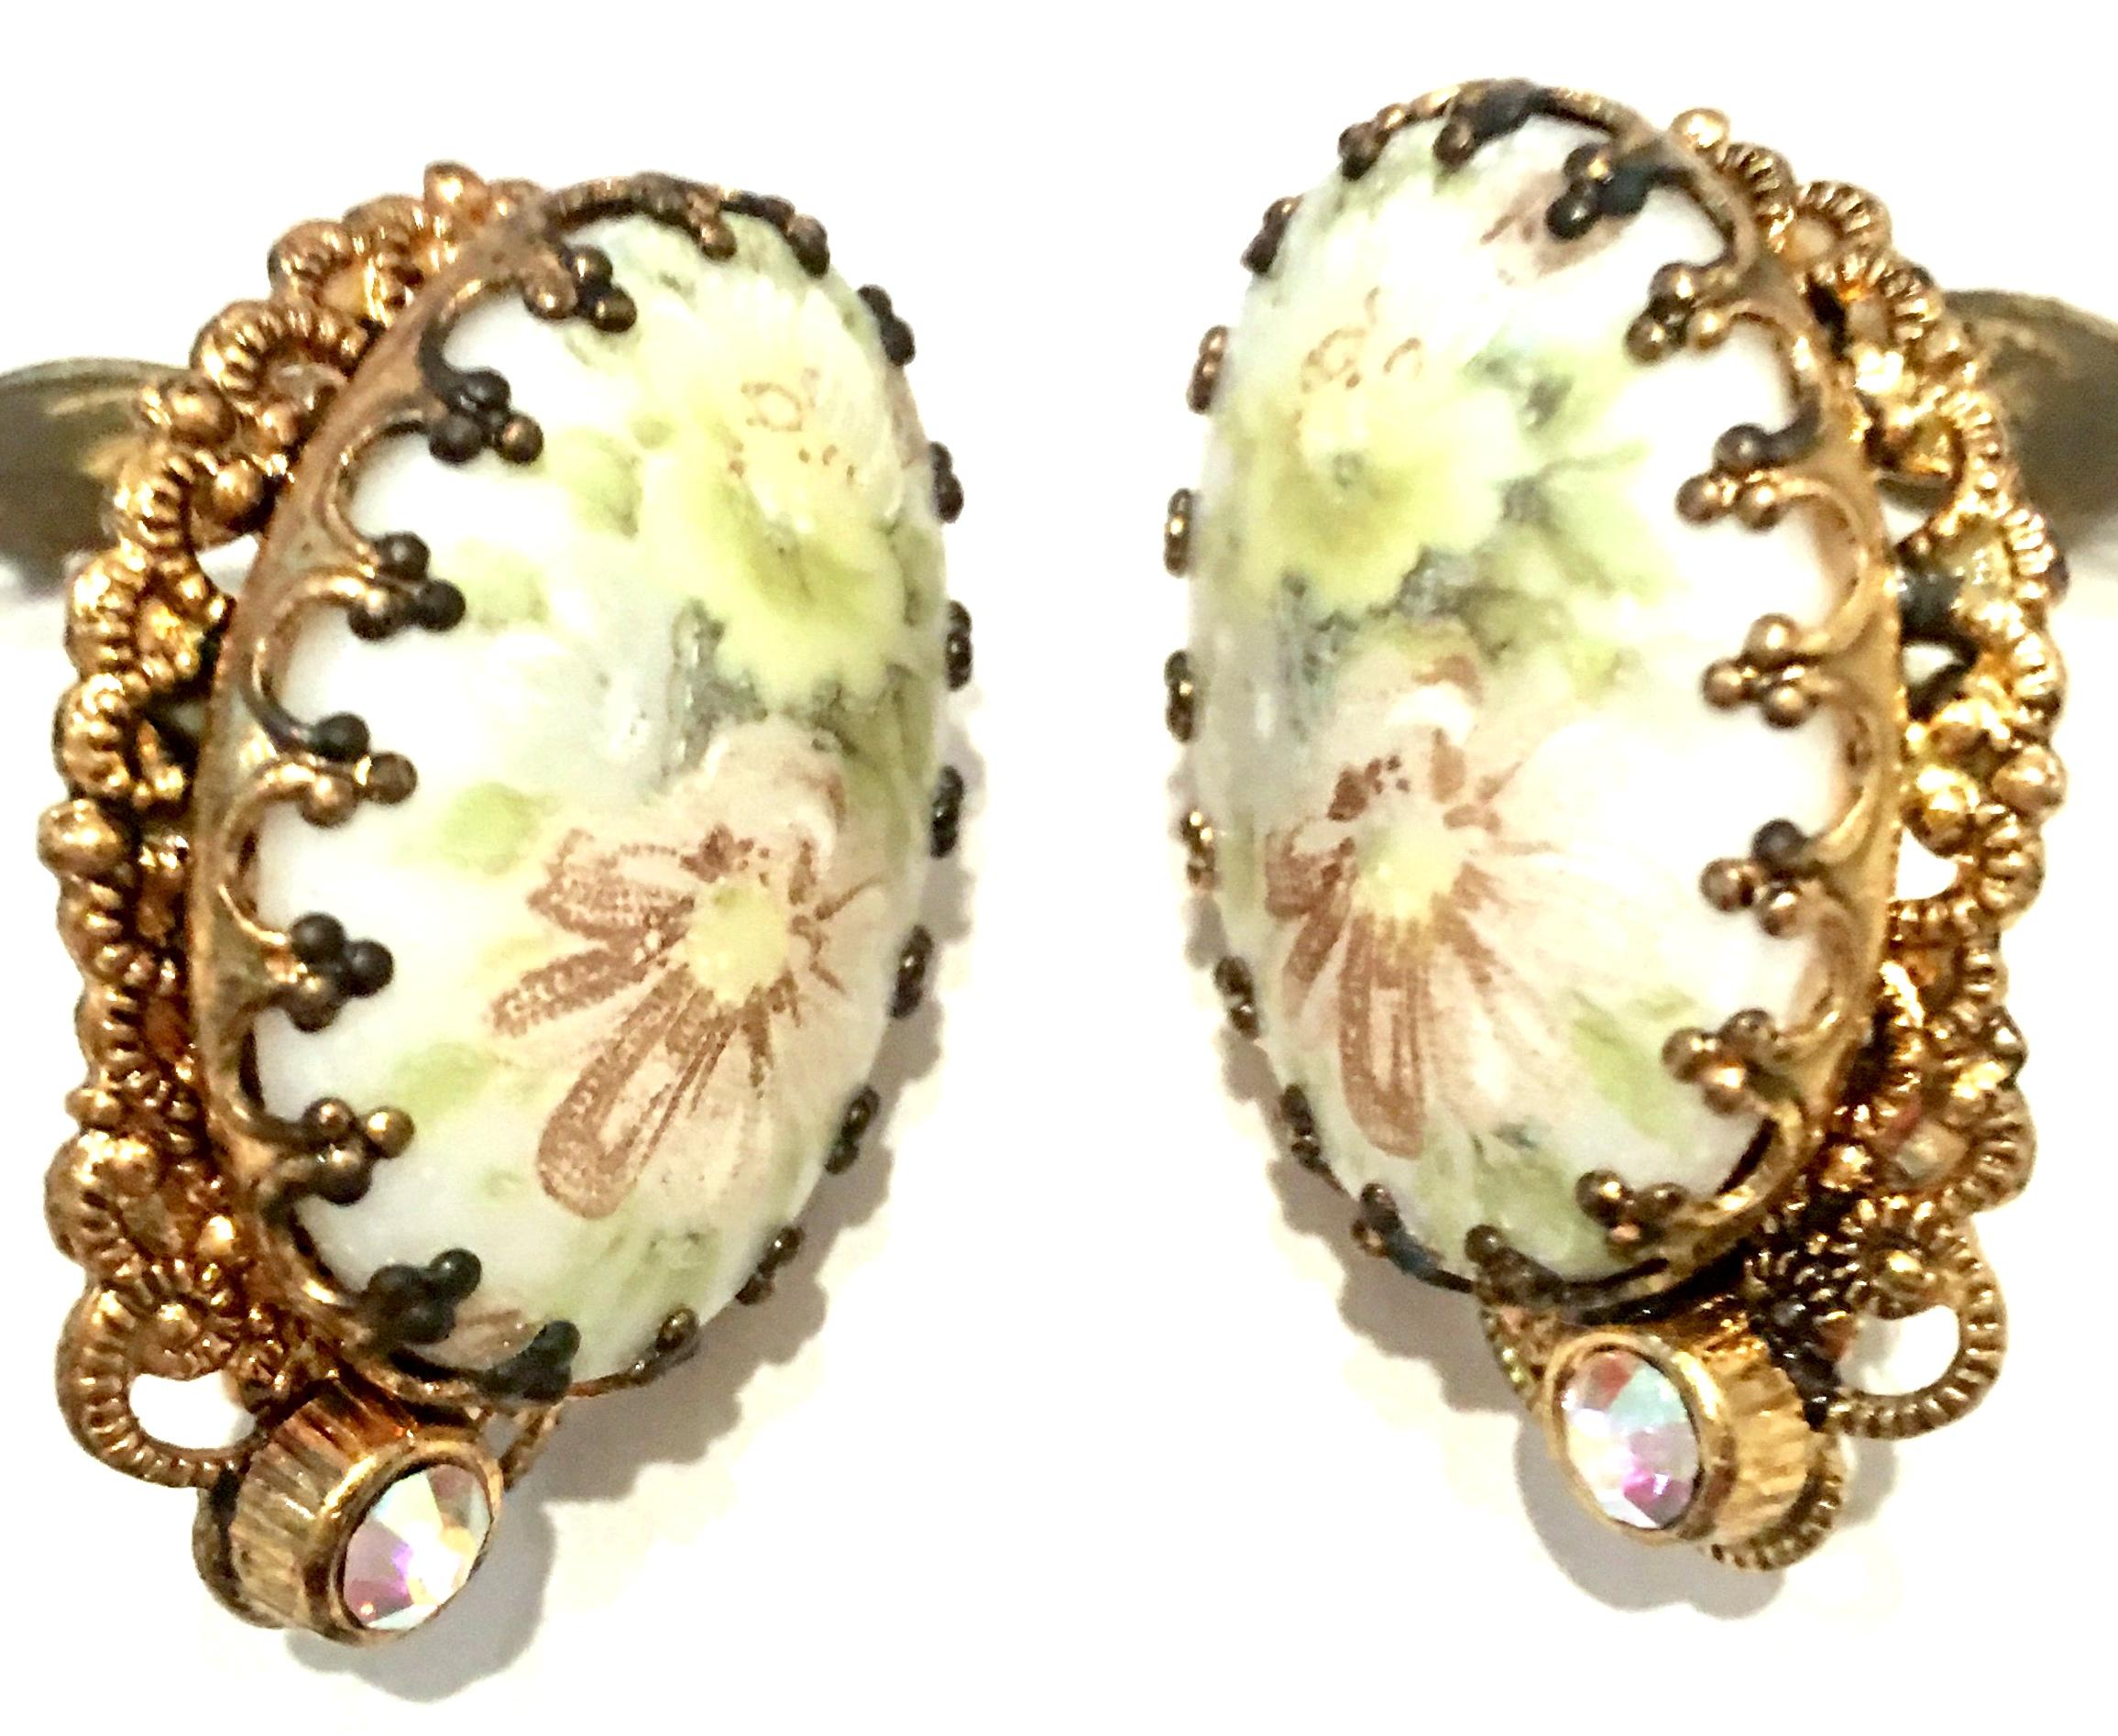 20th Century German Pair Of Gold Plate & Hand Painted Porcelain Earrings In Good Condition For Sale In West Palm Beach, FL